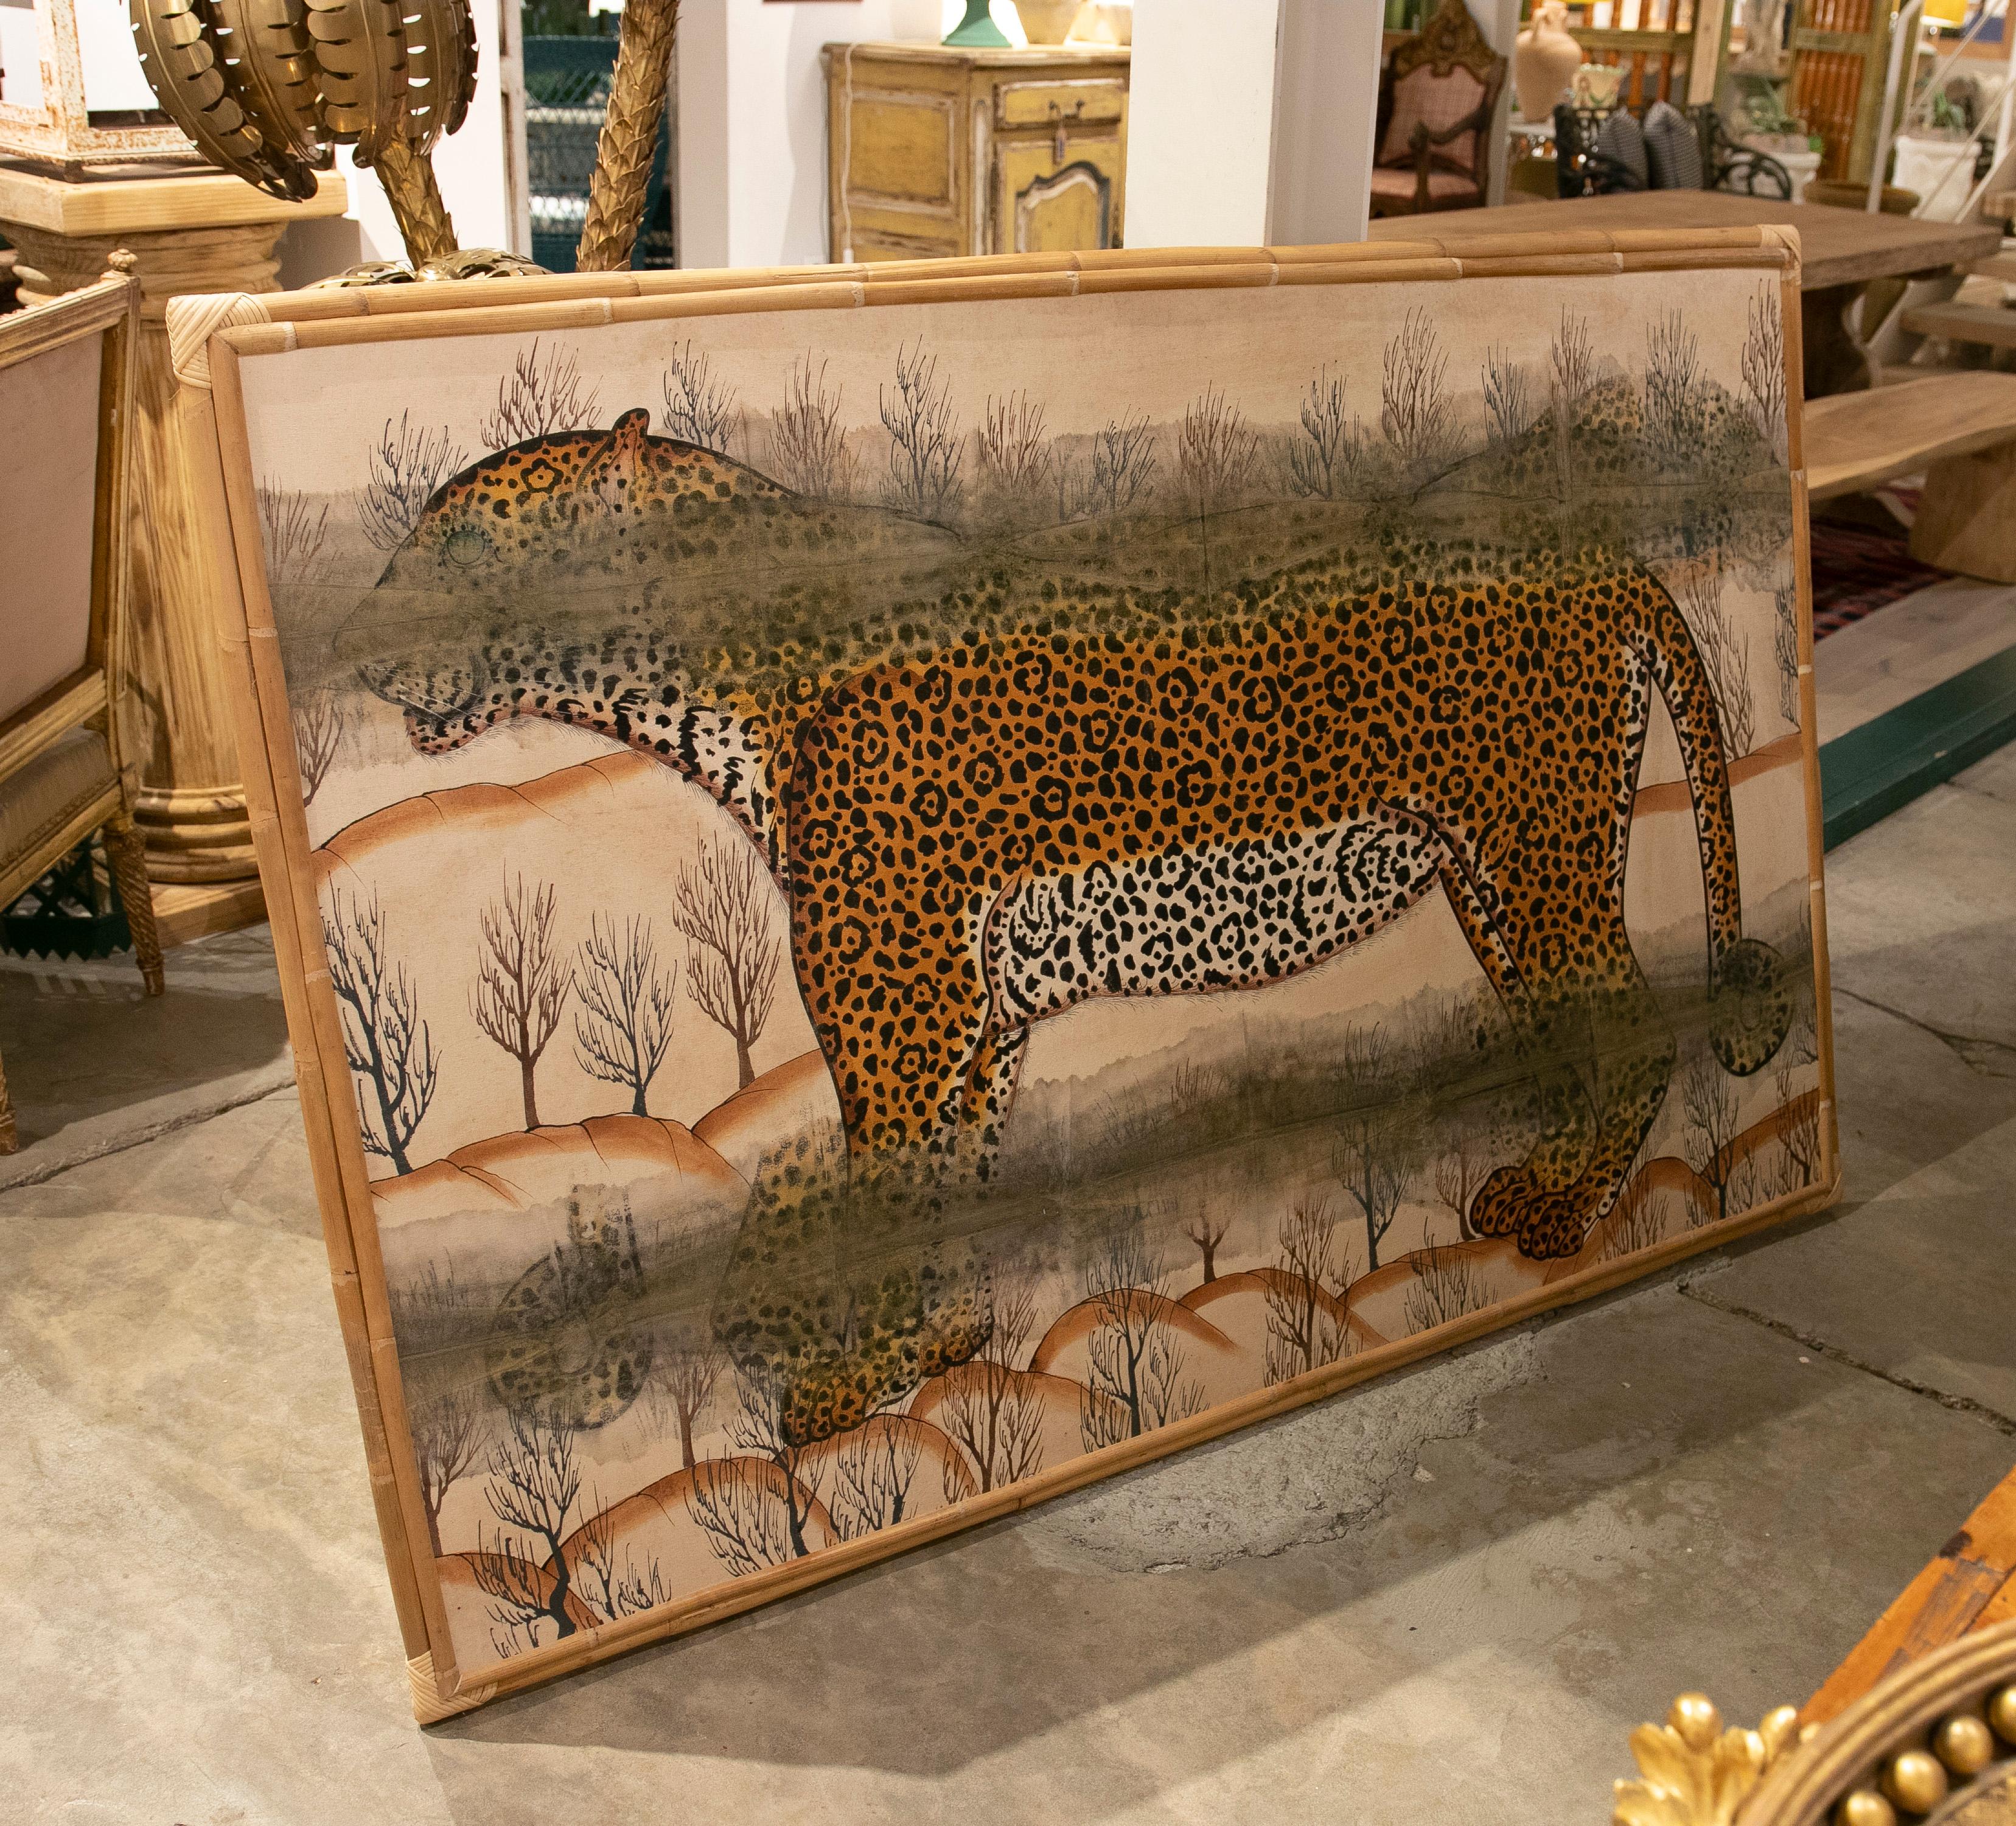 Tiger Painting Designed by Jaime Parlade, Painted on Canvas with a bamboo frame.